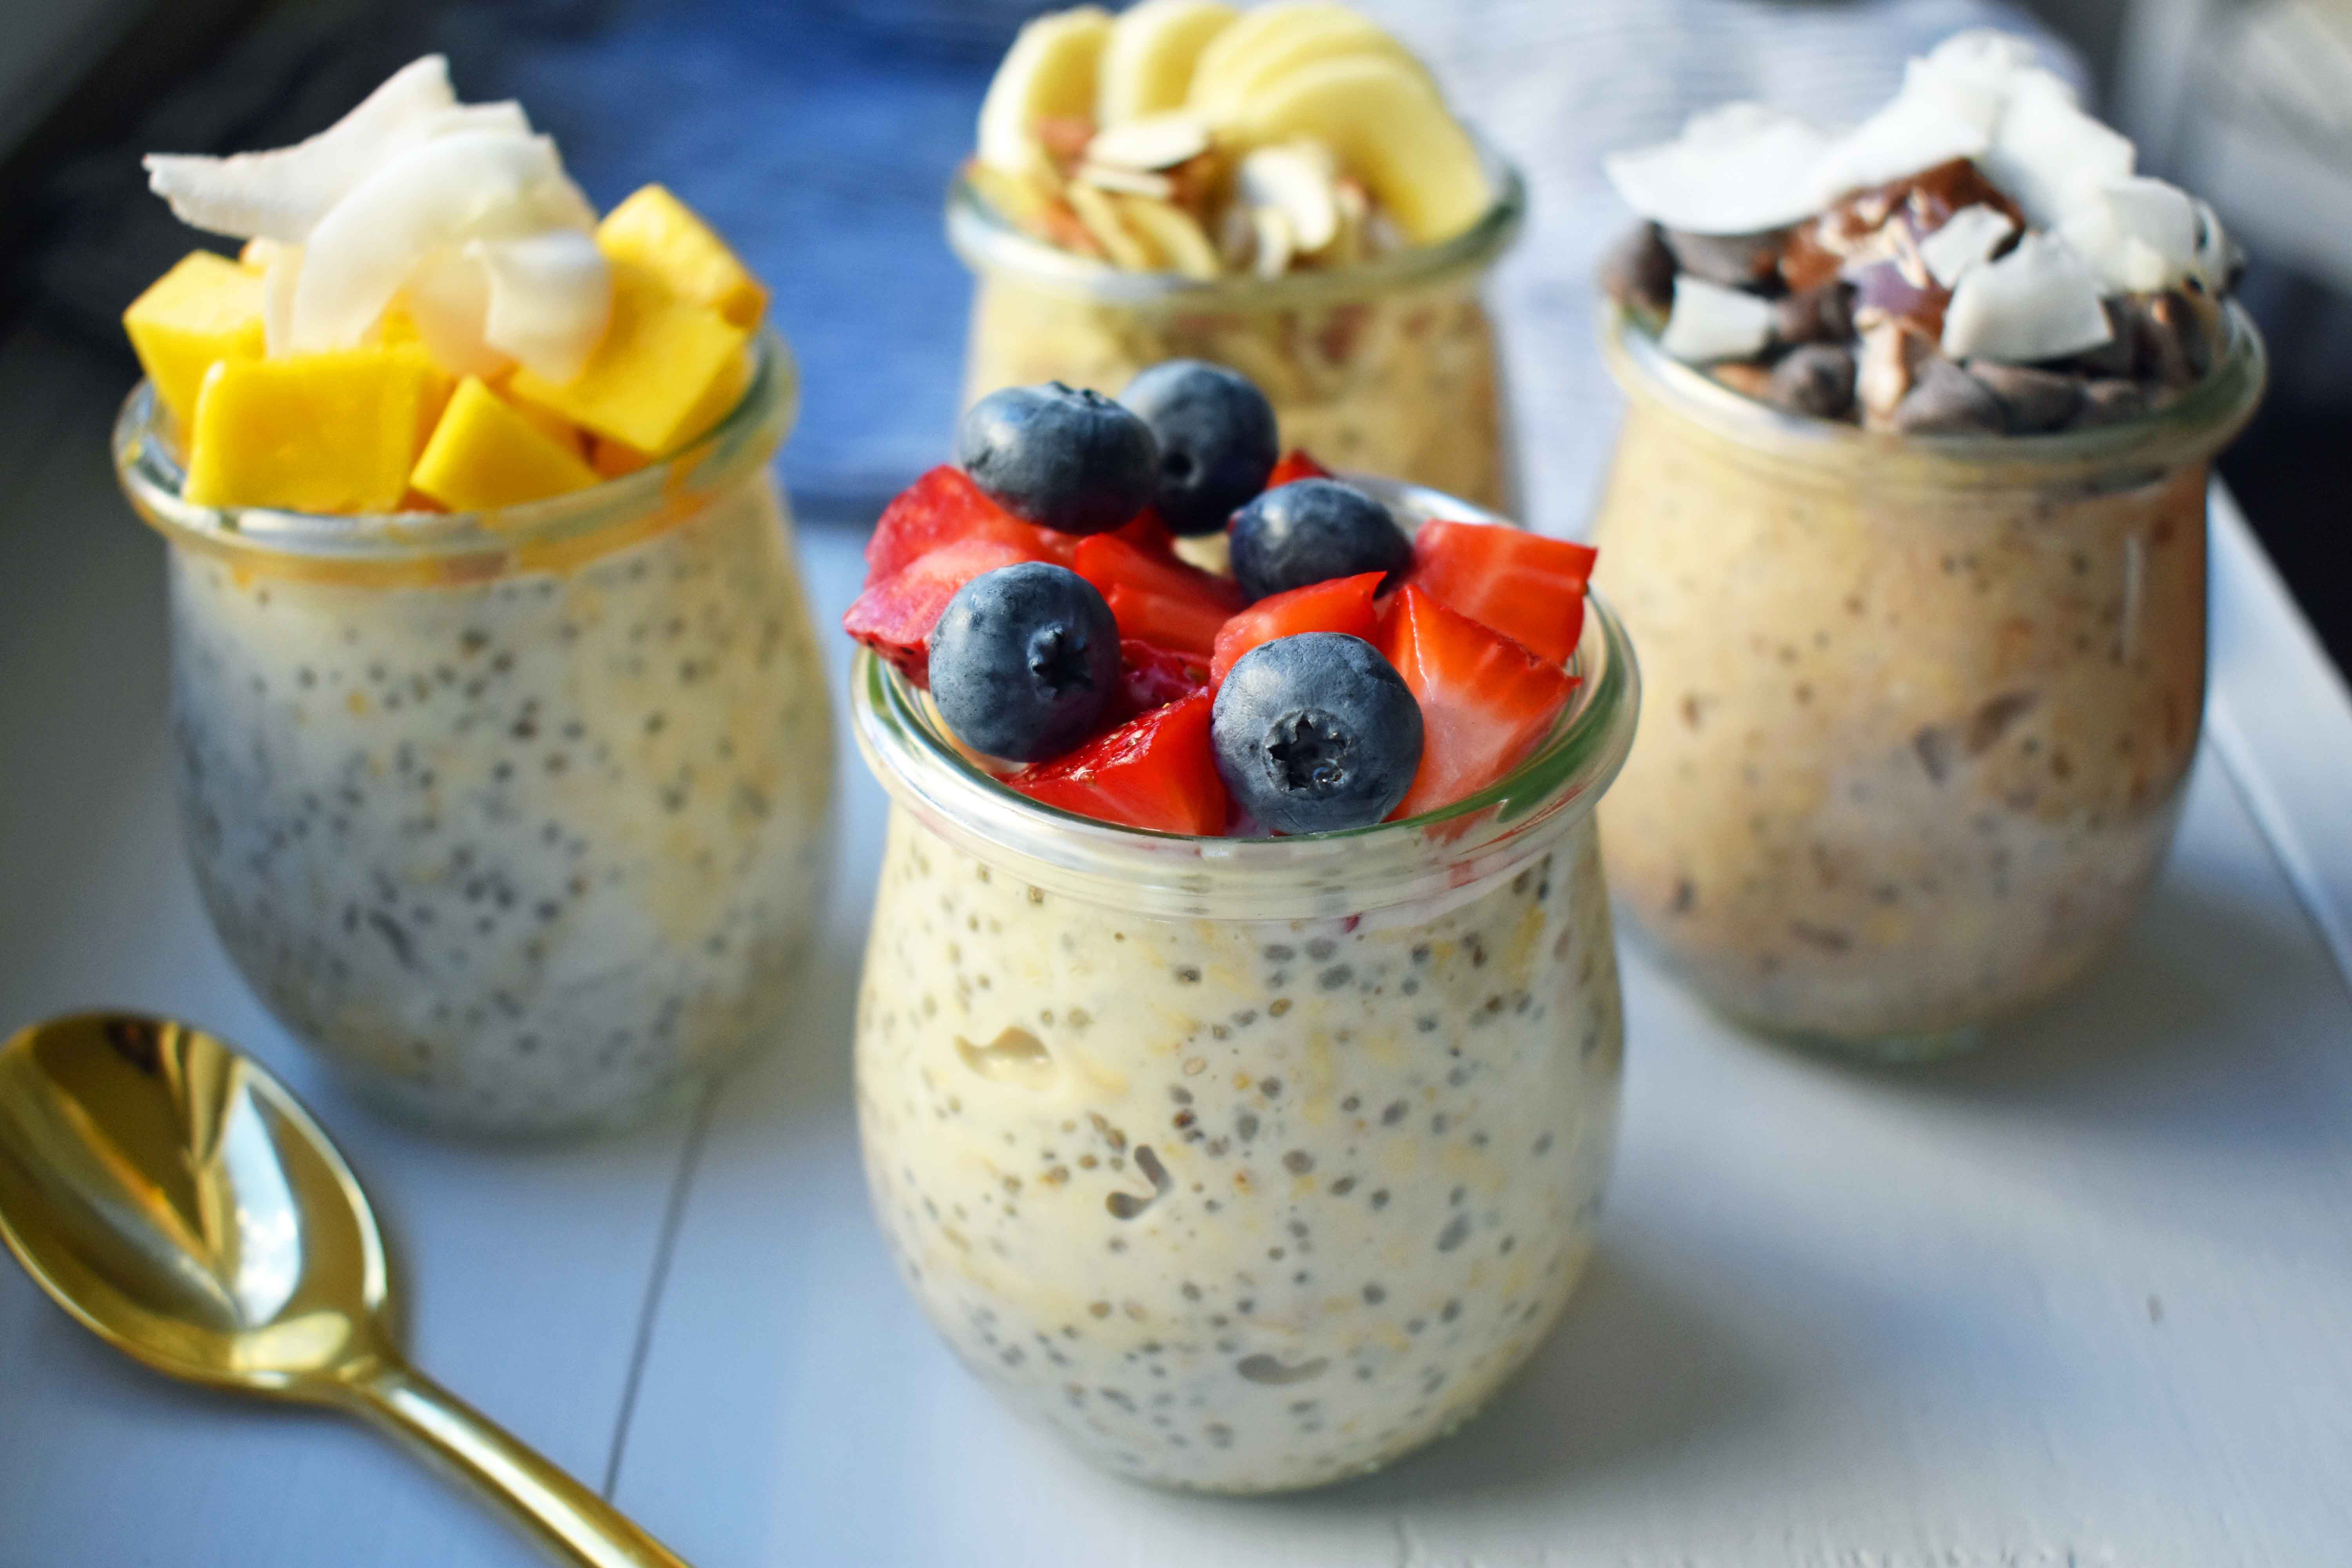 5 Ways to make Overnight Oats. How to make easy perfect overnight oats topped with berries, chocolate, bananas, coconut, and nuts. Naturally sweetened and protein filled breakfast. www.modernhoney.com